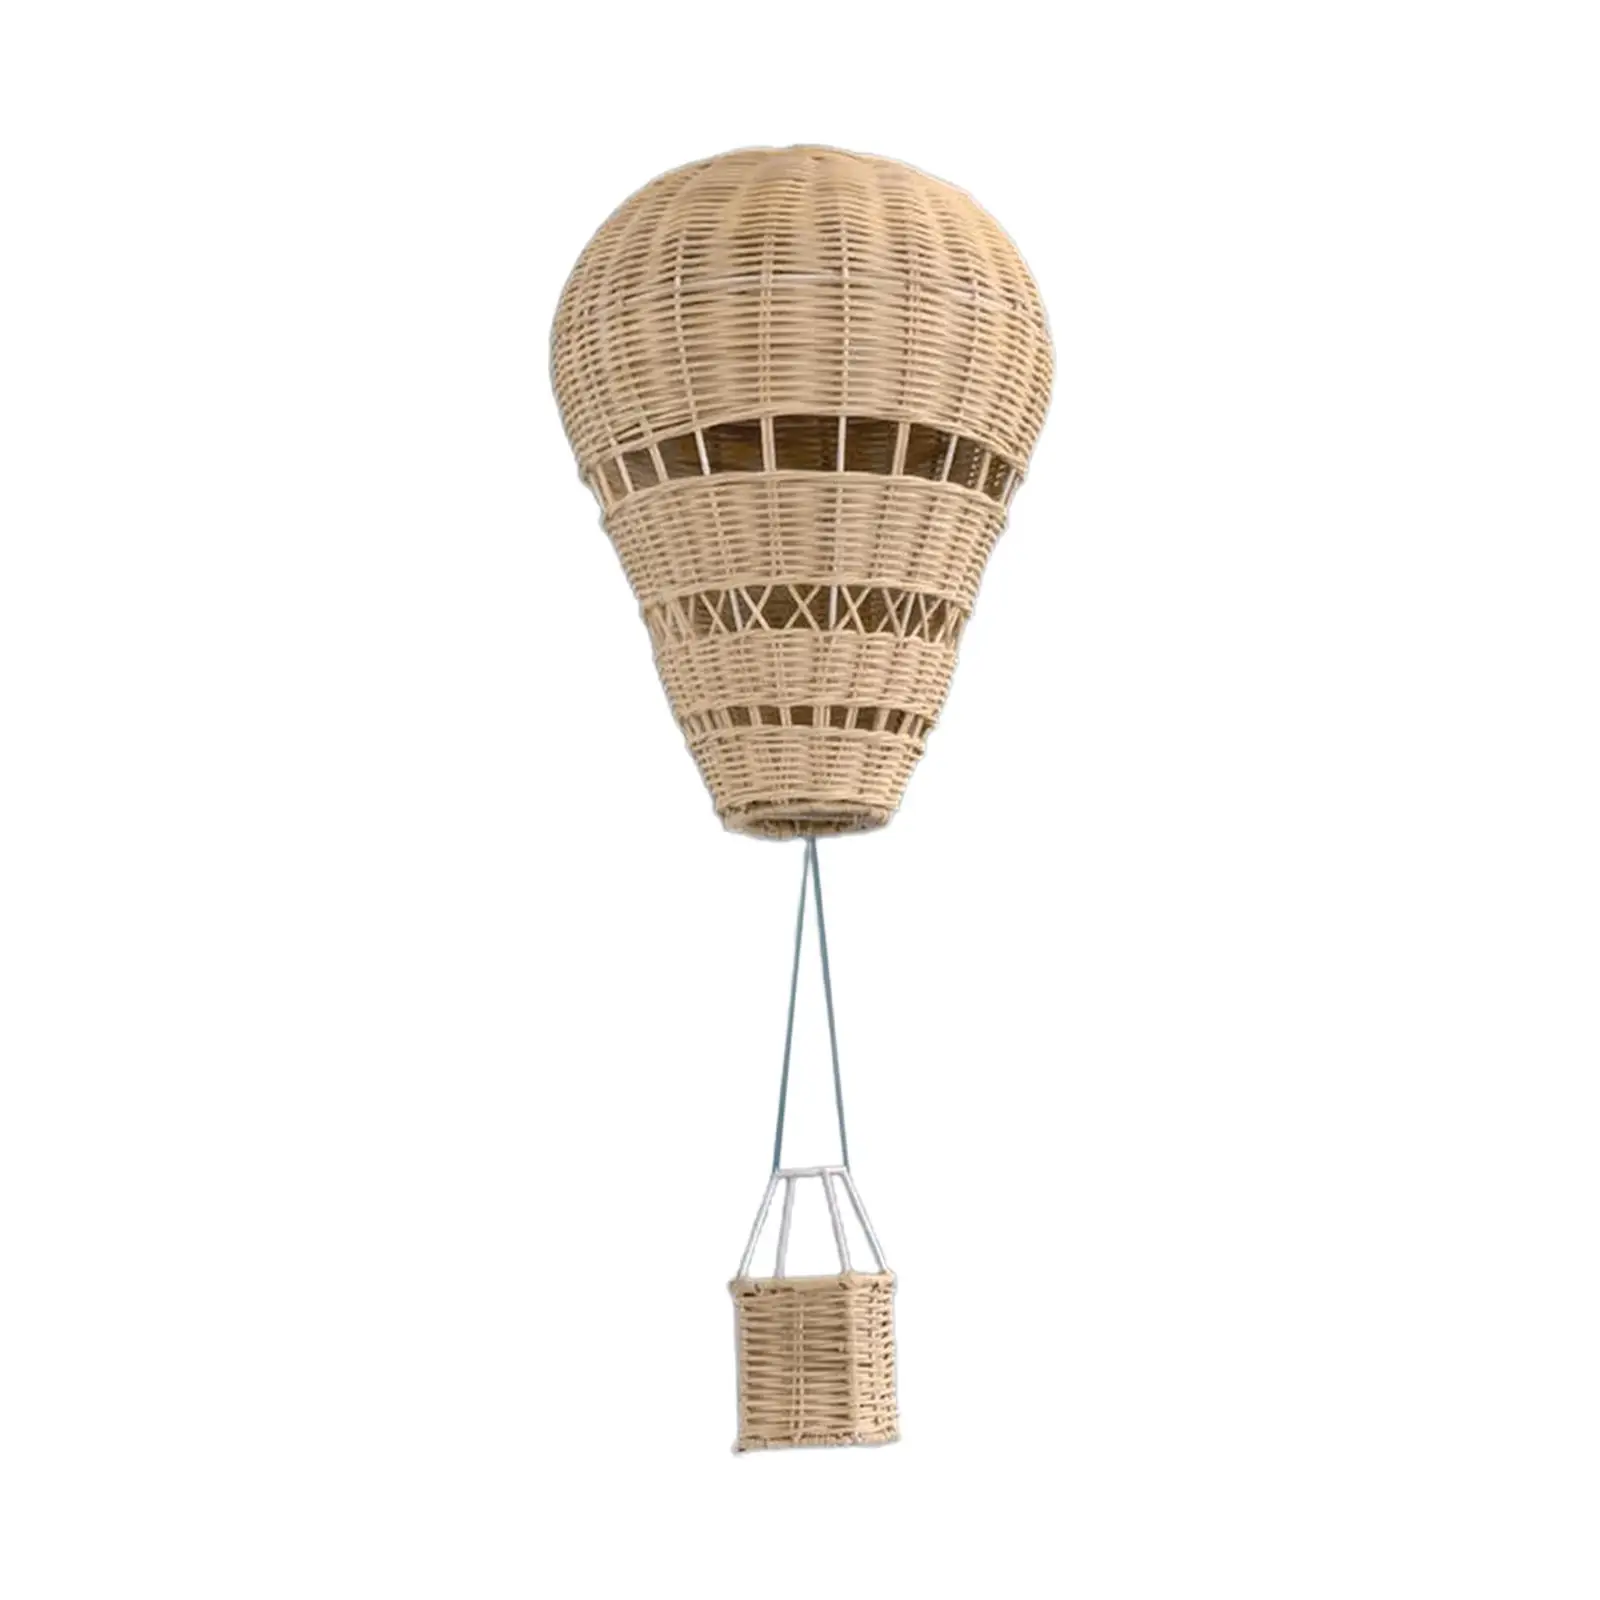 Hot Air Balloon Photography Birthday Gift Unique Wall Hanging Ornament Crafts Party Ceiling Creative Backdrop Pendant Decoration